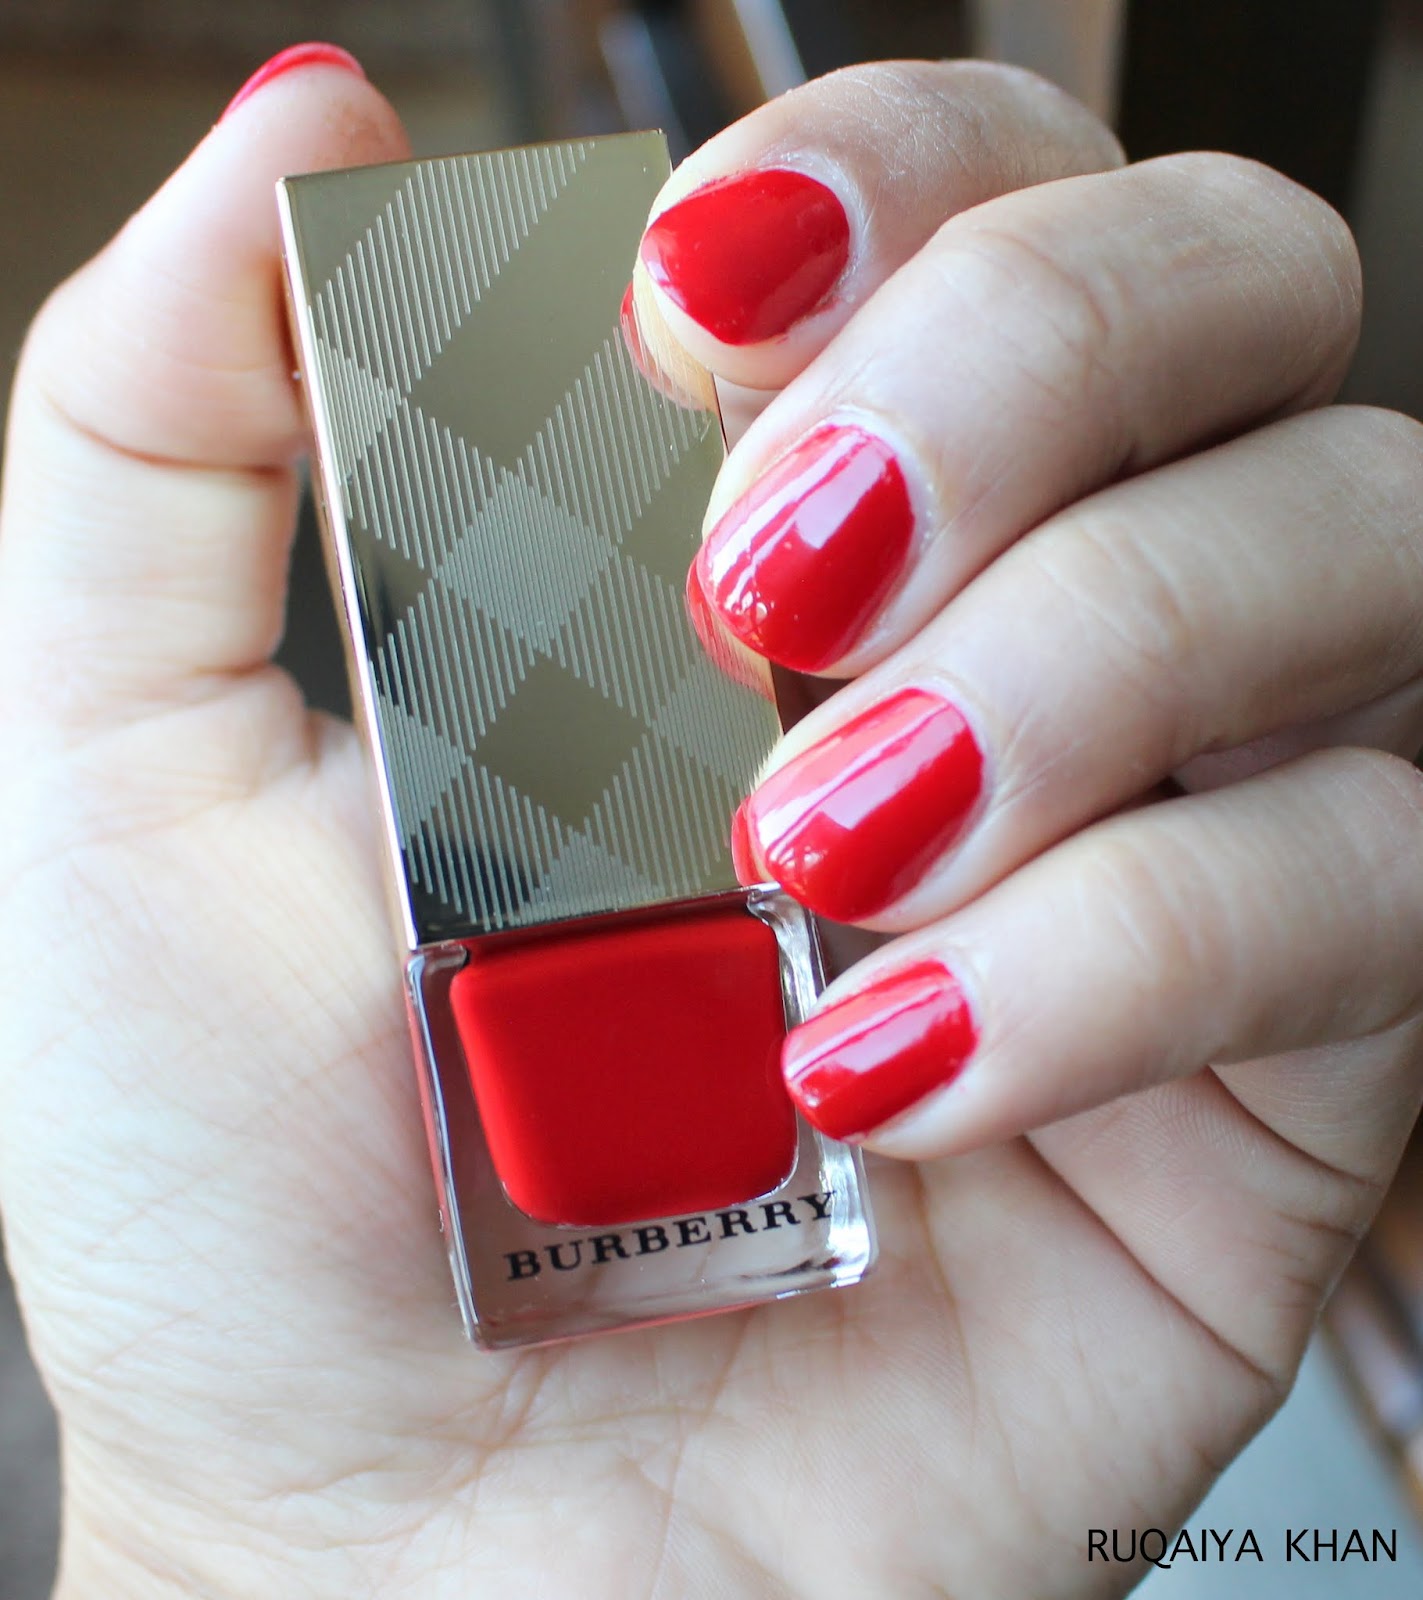 Actualizar 77+ imagen burberry military red nail polish